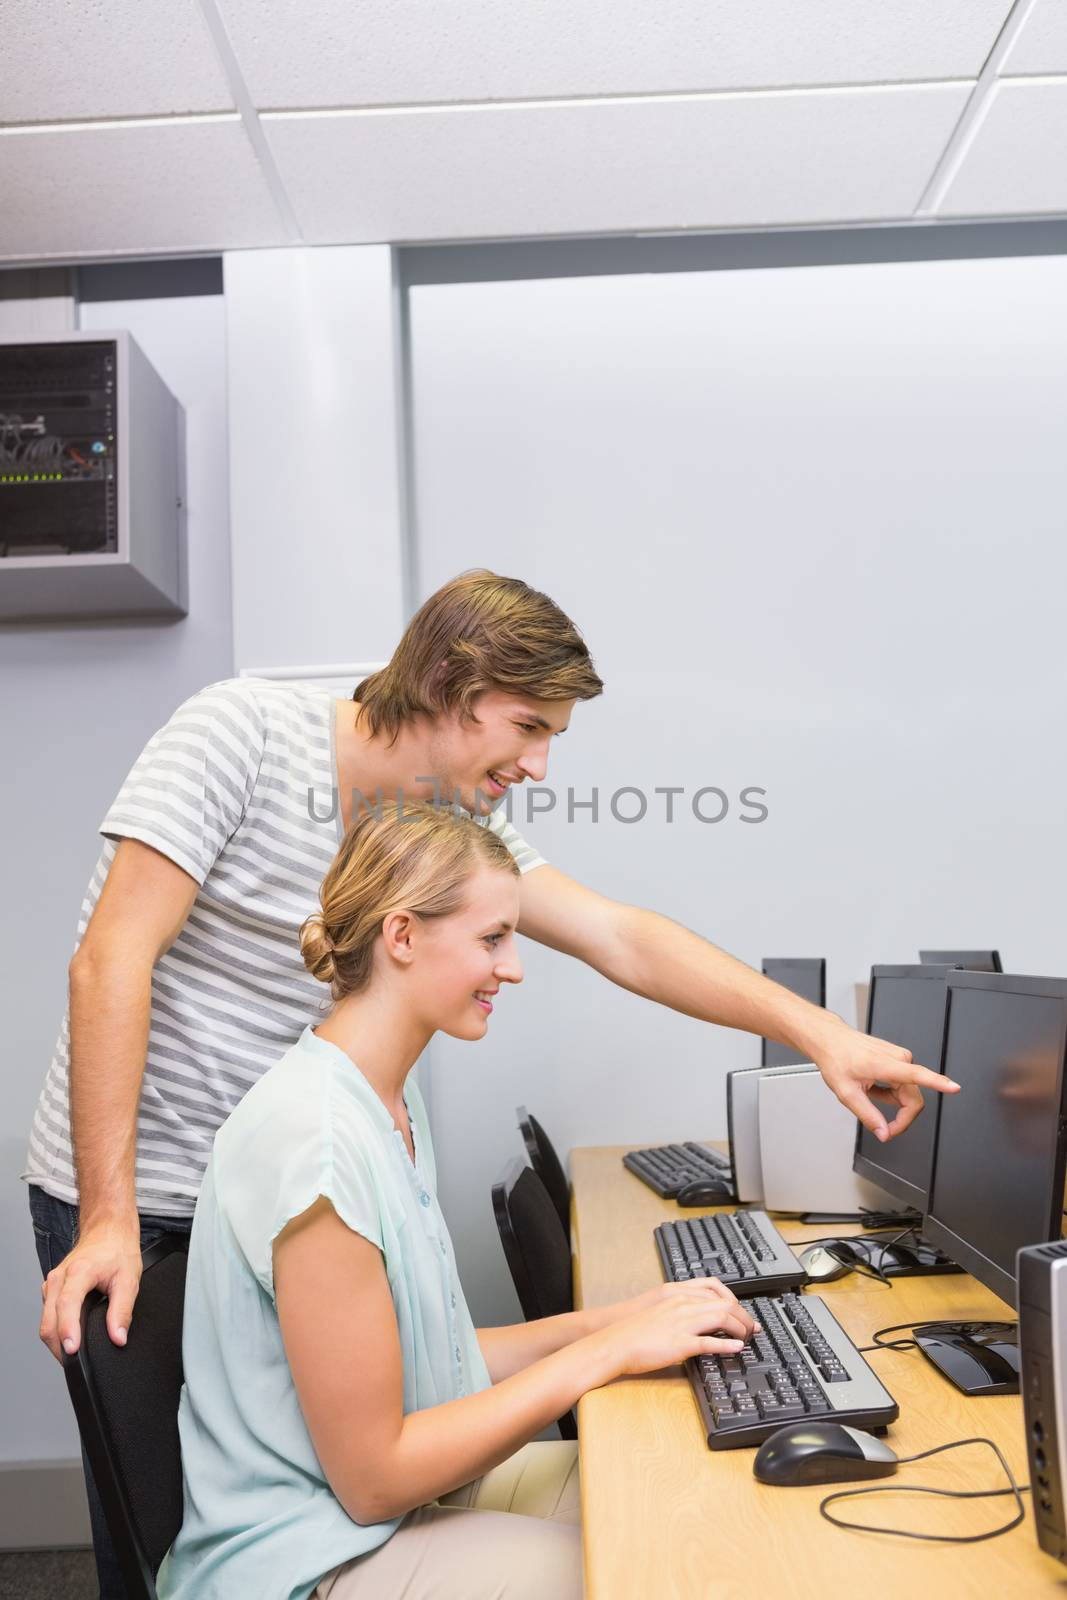 Students working on computer in classroom at the university